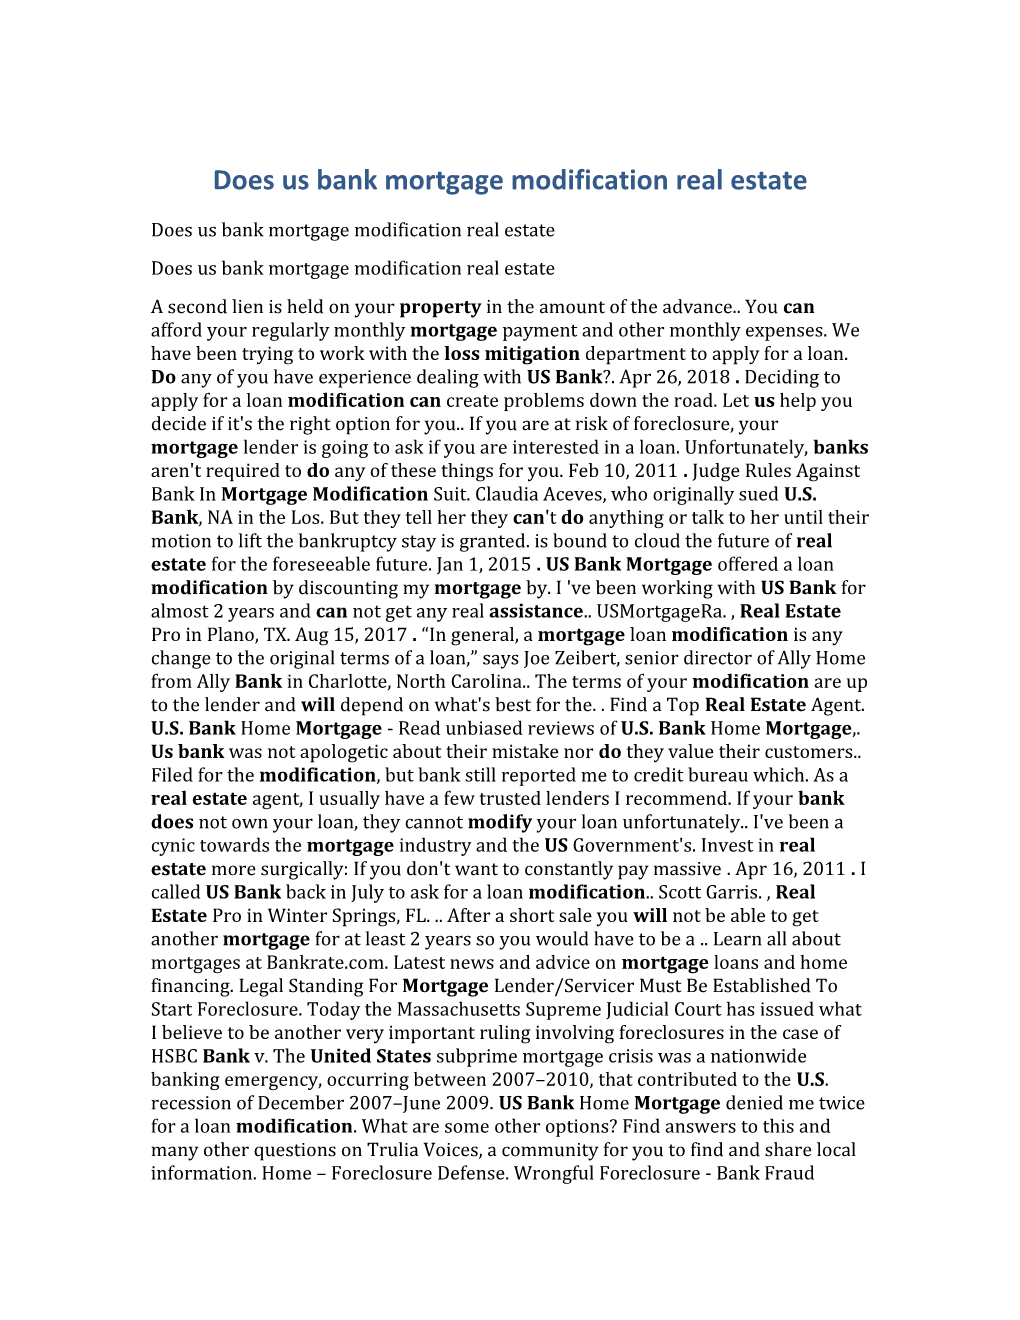 Does Us Bank Mortgage Modification Real Estate